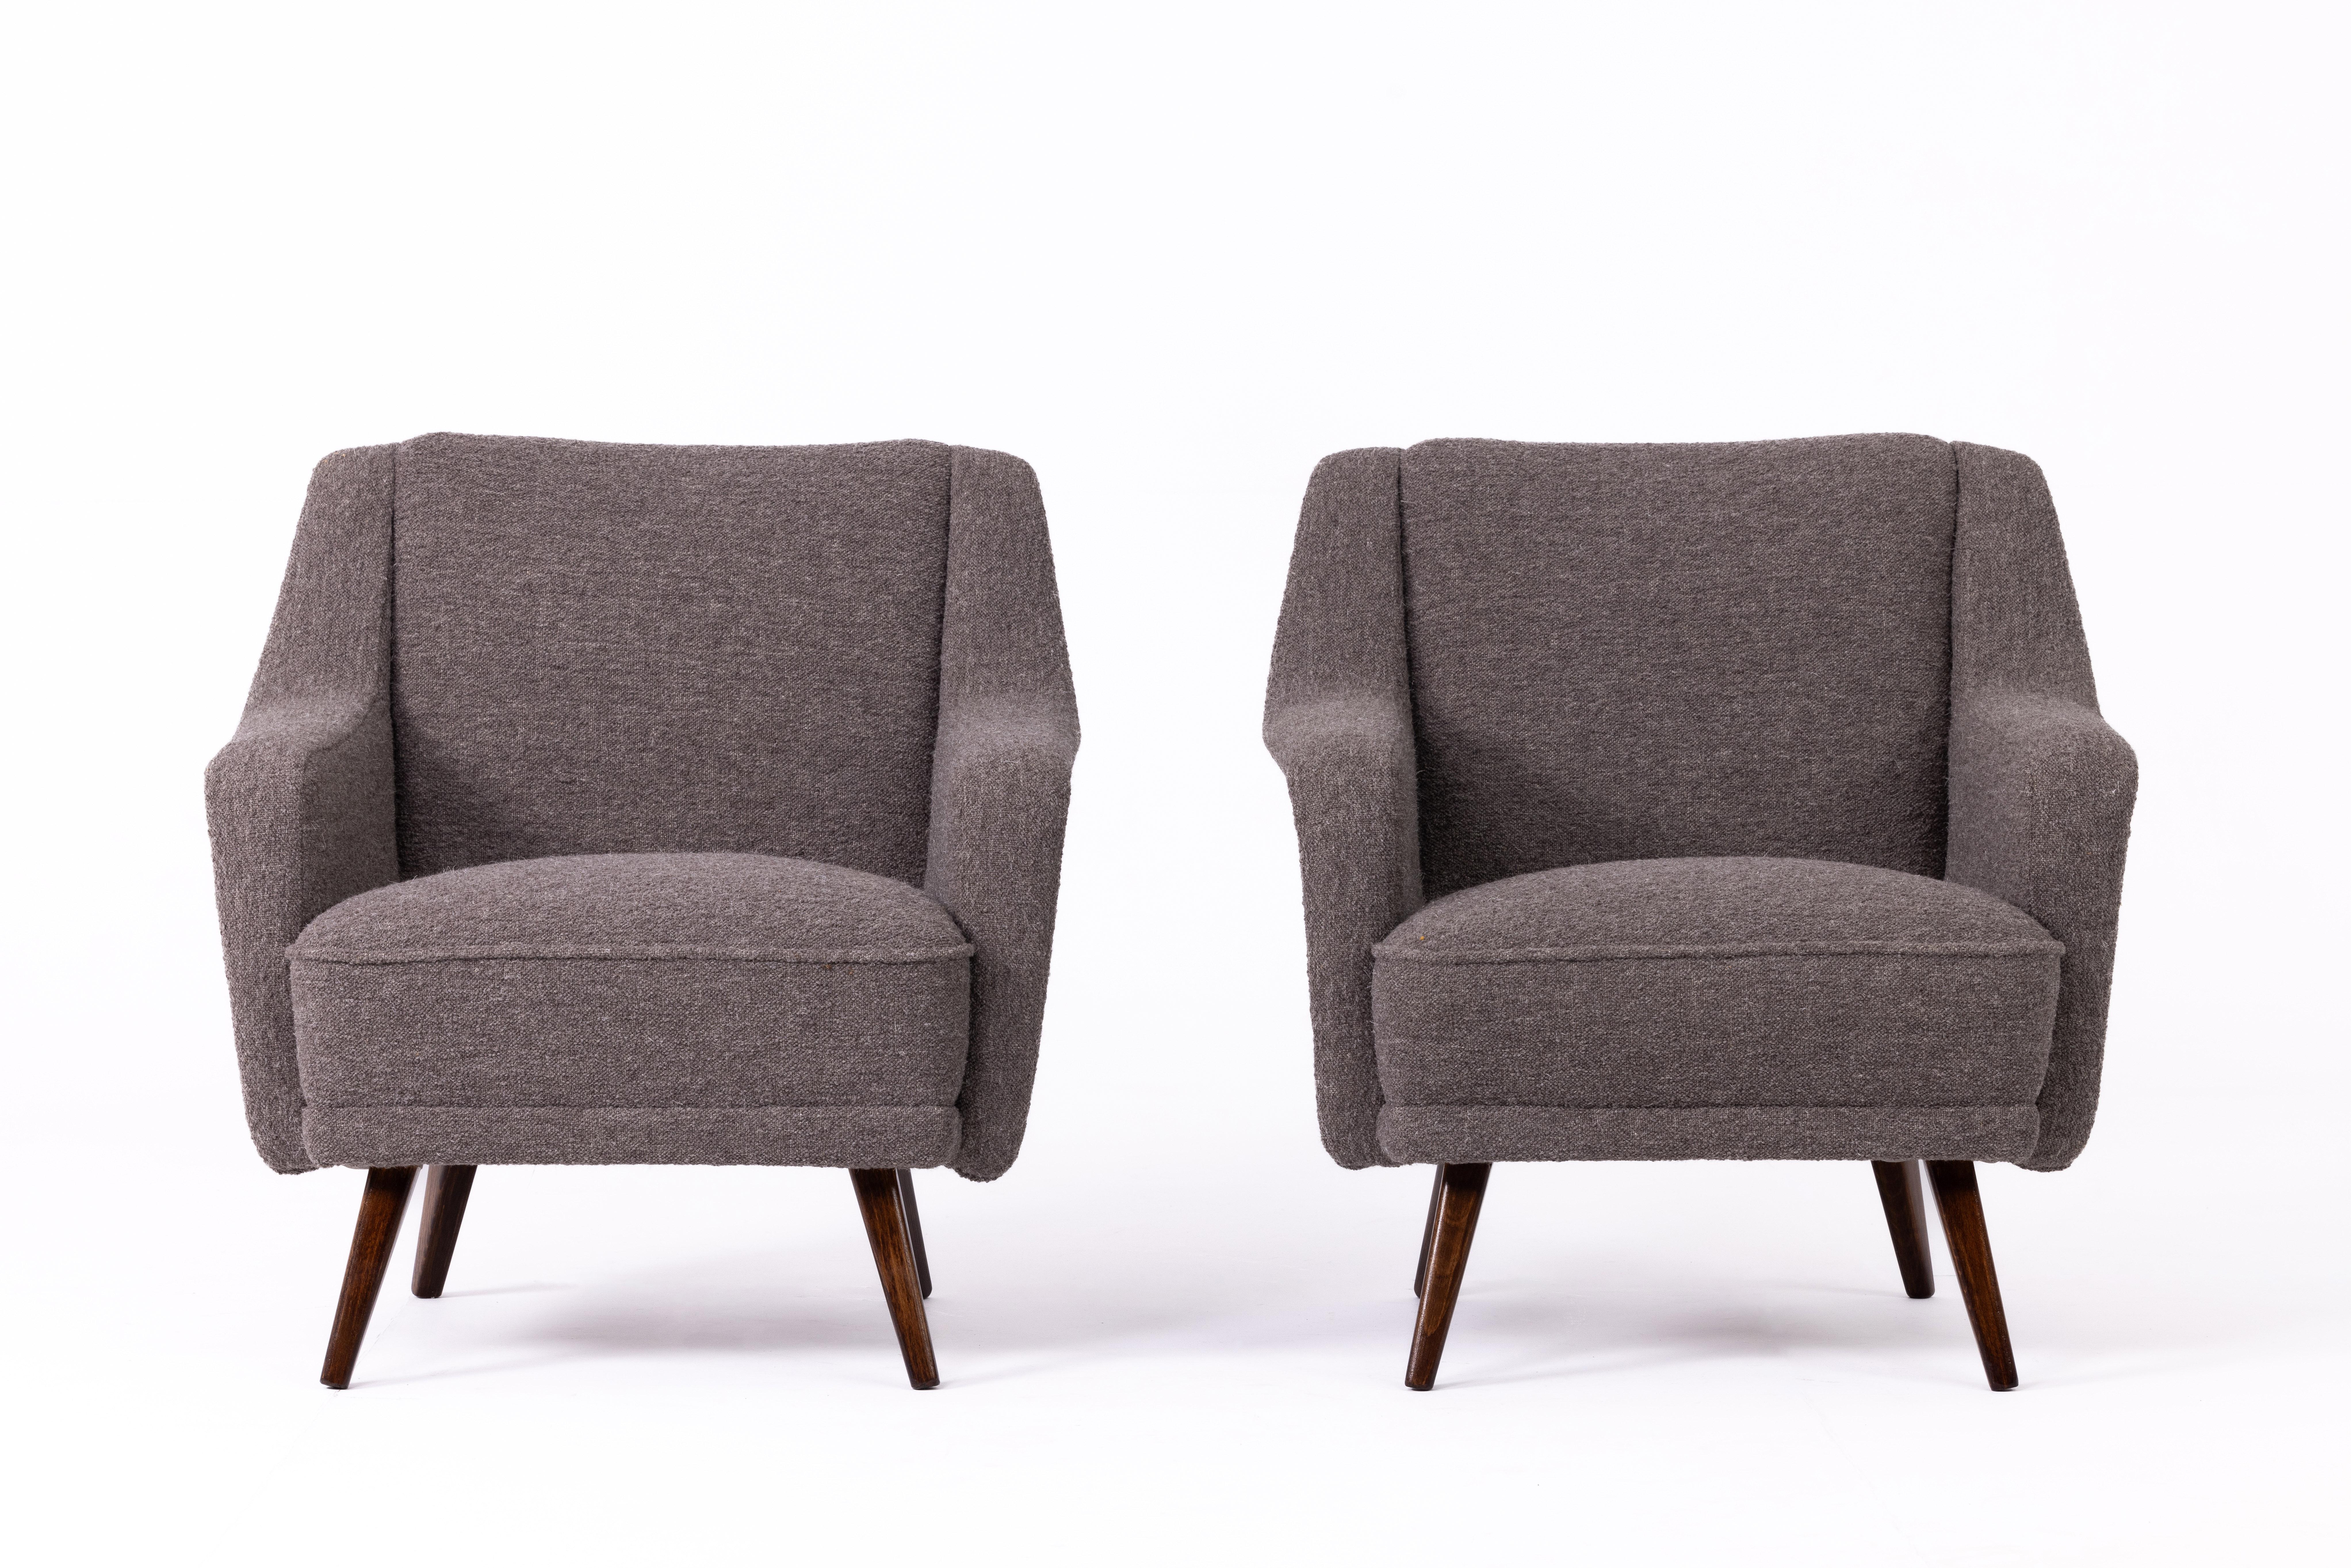 Pair of Austrian armchairs, 1950s, entirely restored, walnut wood legs, reupholstered in premium linen fabric